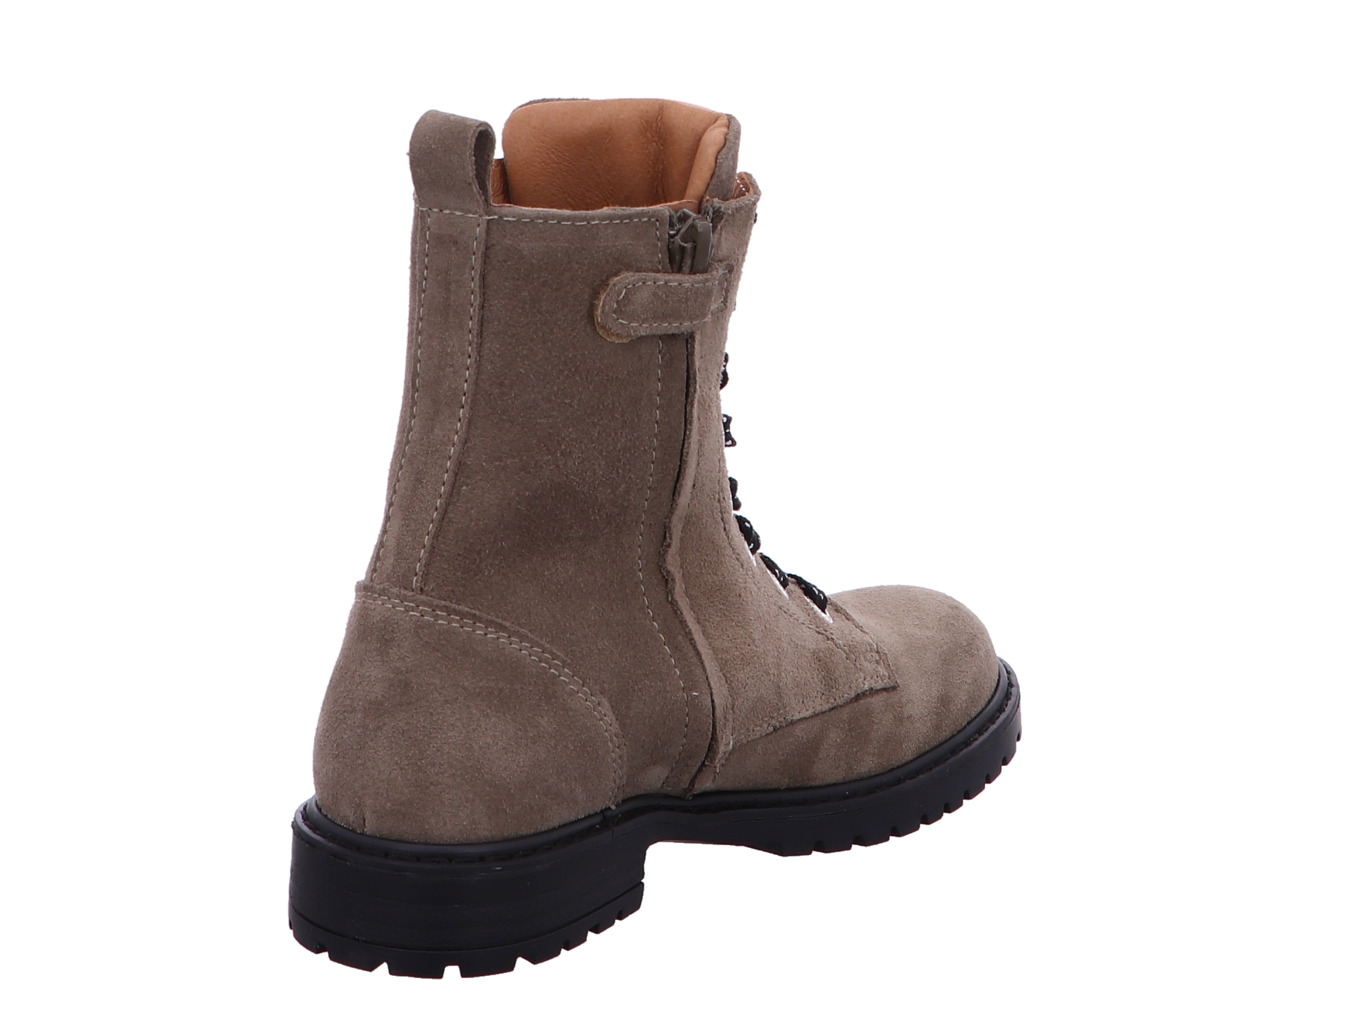 develab_girls_mid_boot_laces_42850_233_2149